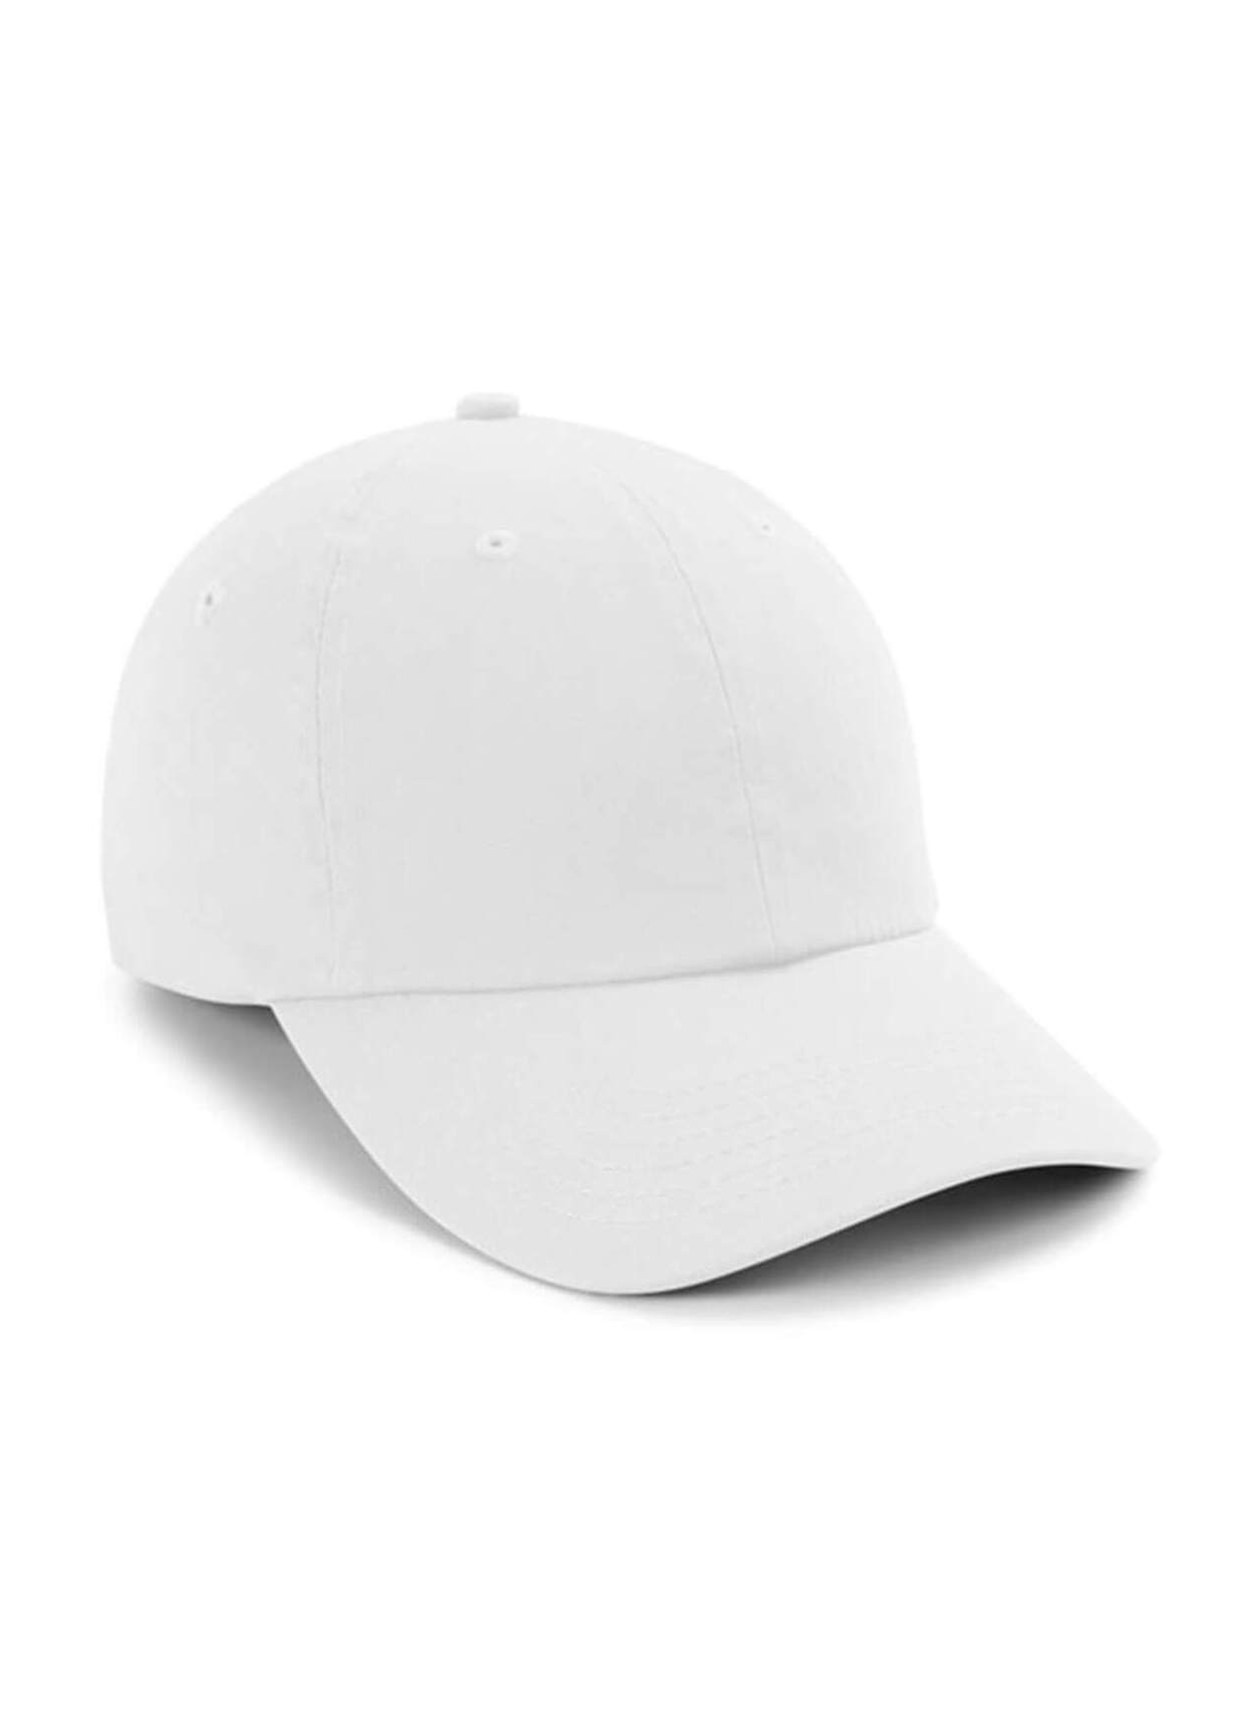 Imperial White The Original Buckle Hat